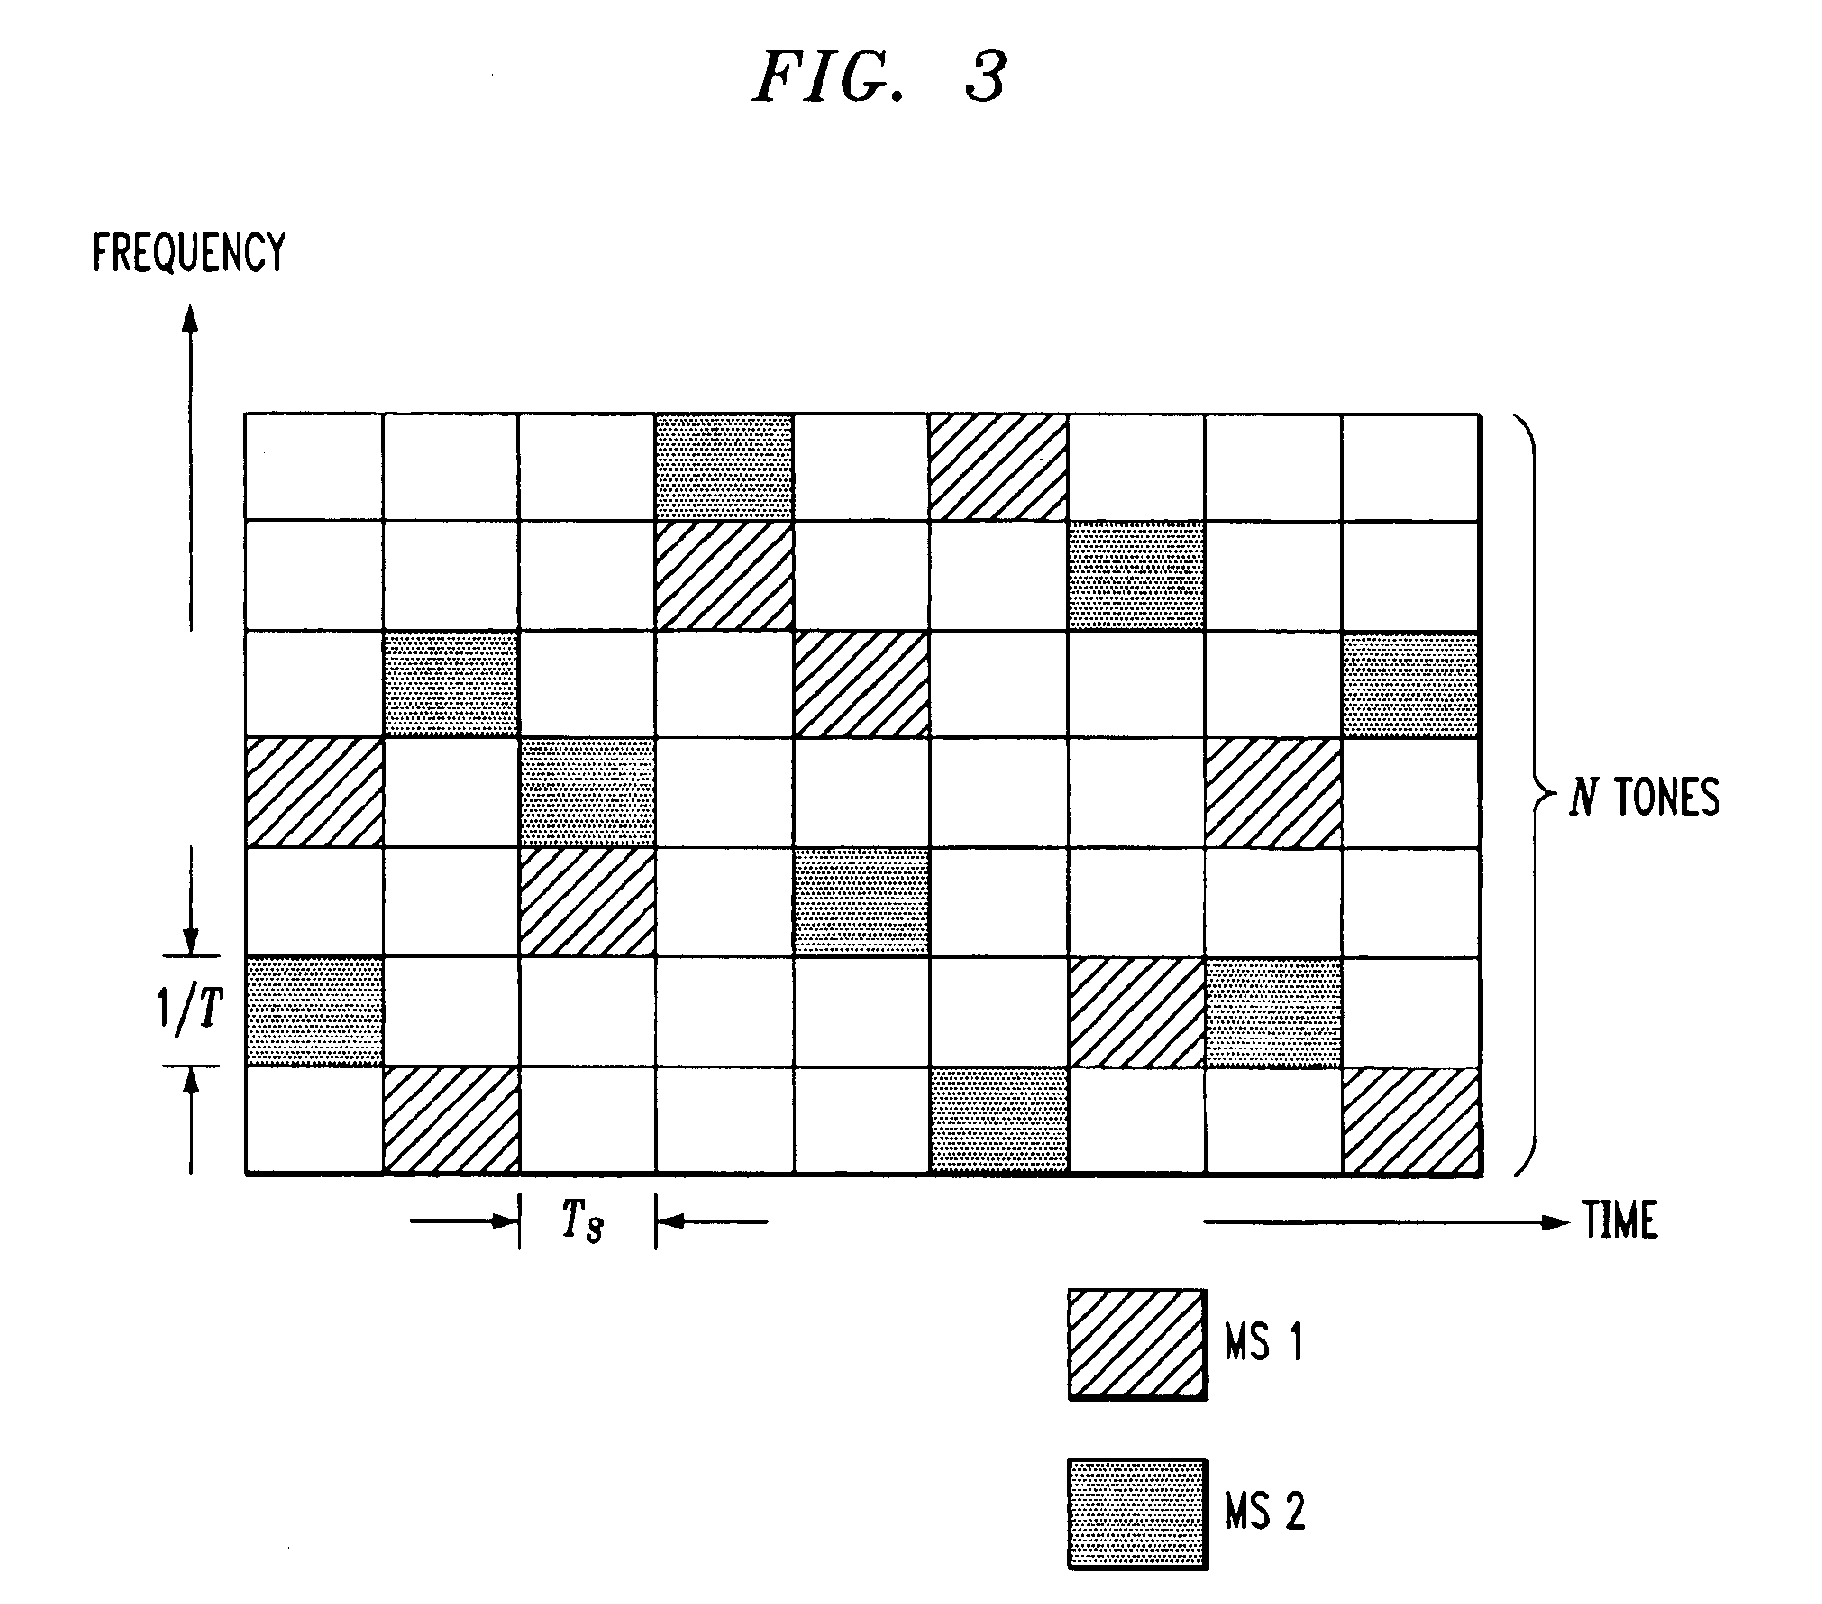 Adaptive antenna array methods and apparatus for use in a multi-access wireless communication system